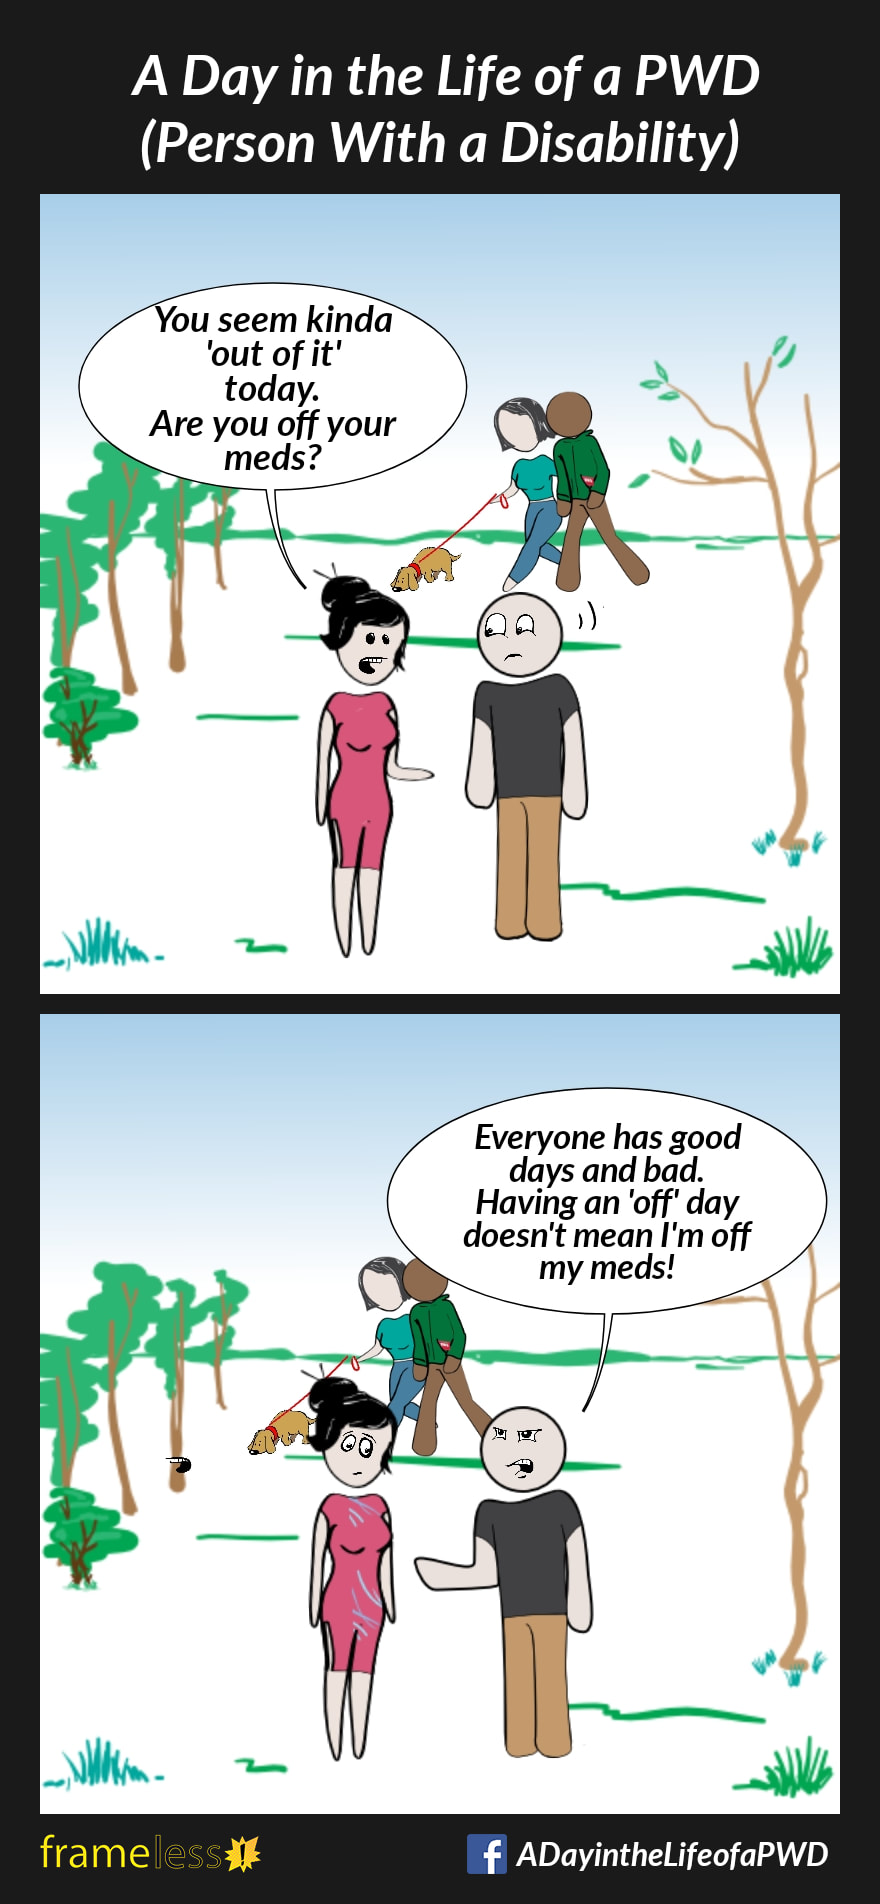 COMIC STRIP 
A Day in the Life of a PWD (Person With a Disability) 

Frame 1:
A man is in a park with his girlfriend.
GIRLFRIEND: You seem kinda 'out of it' today. Are you off your meds?

Frame 2:
MAN (irritated): Everyone has good days and bad. Having an 'off' day doesn't mean I'm off my meds!